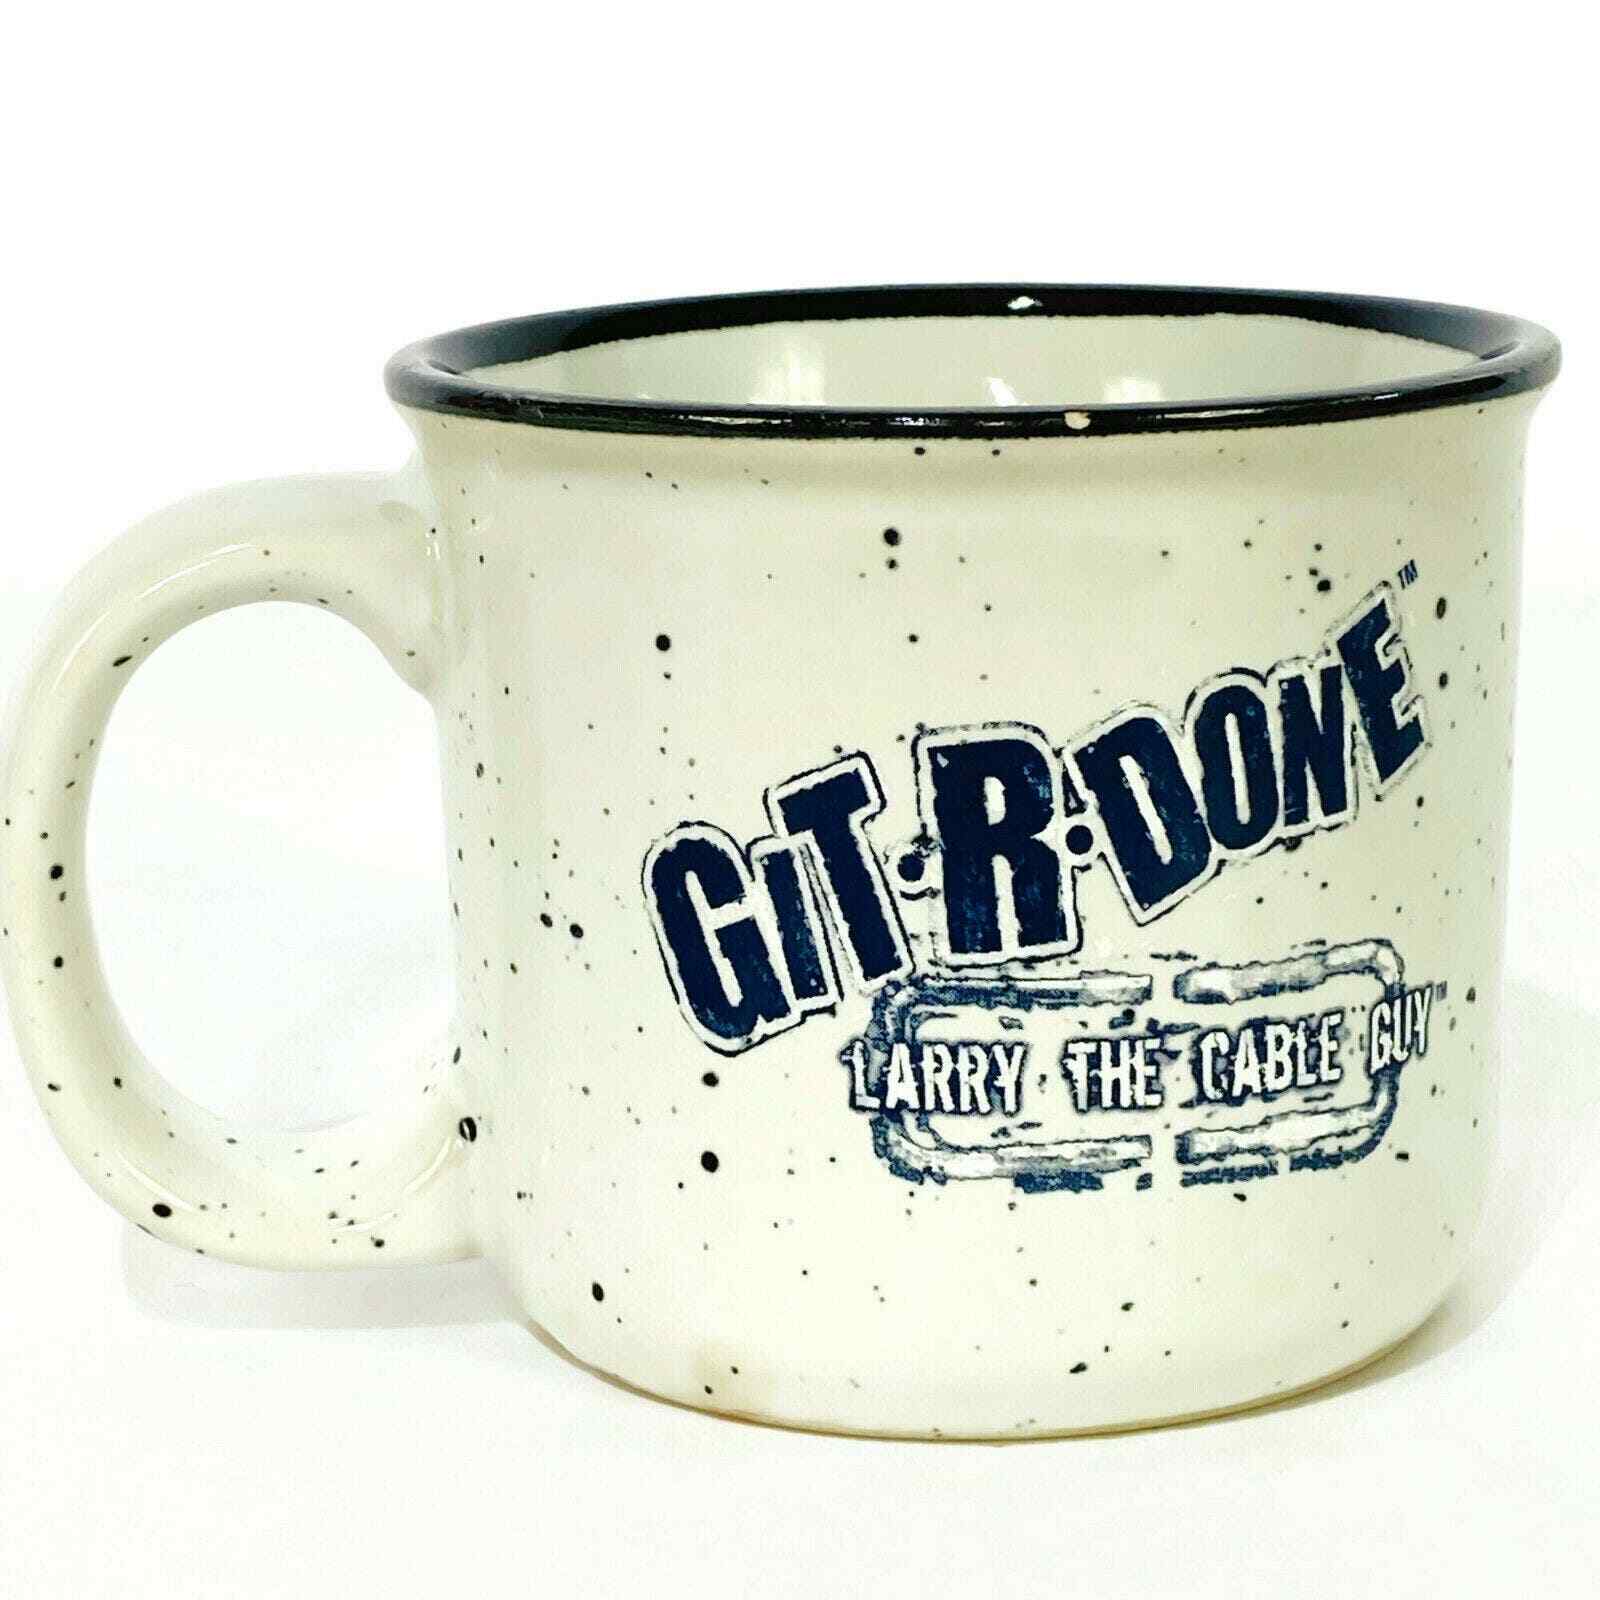 Larry the Cable Guy Git-R-Done Coffee Mug Off White and Blue 4x3.5 16 oz